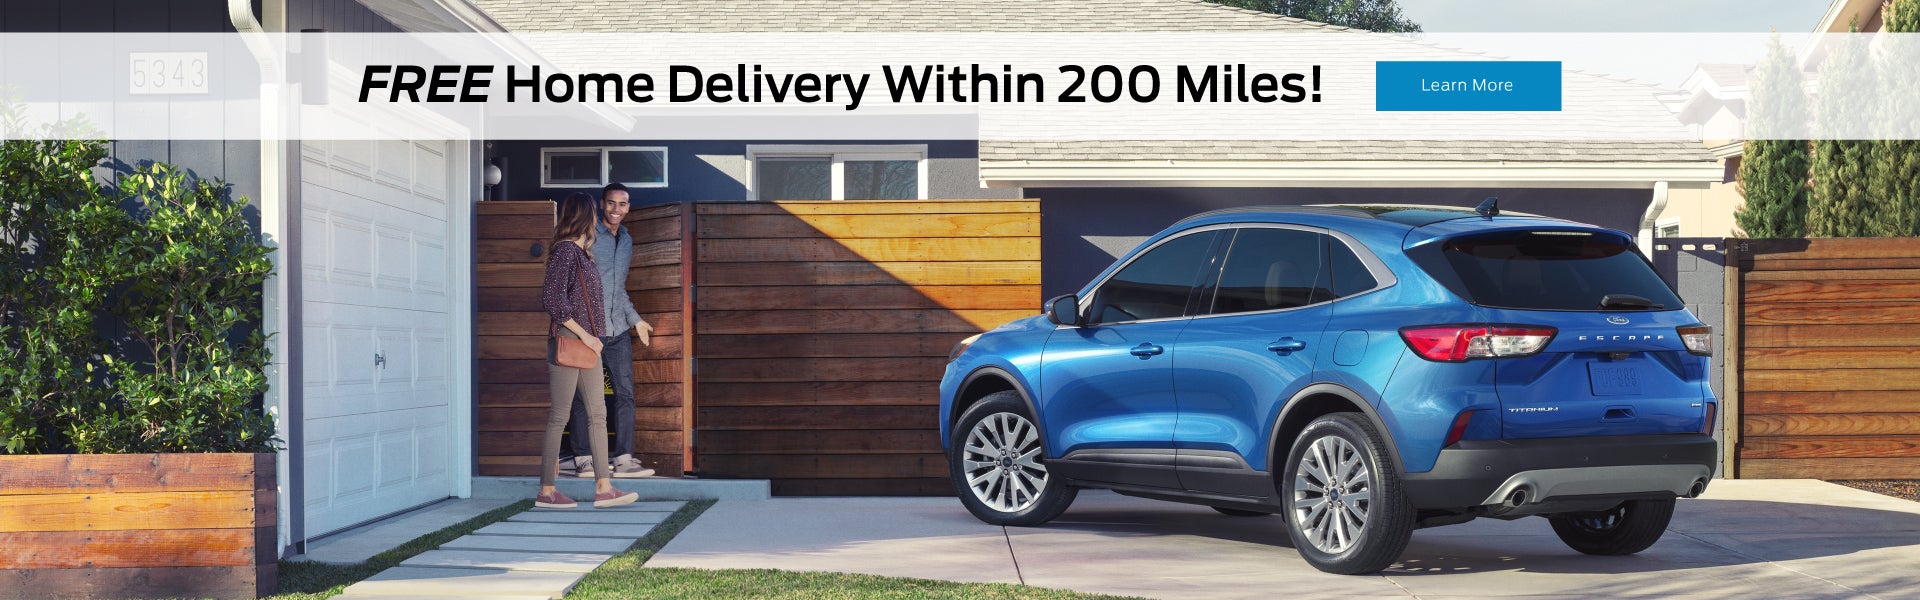 Free Home Delivery Within 200 Miles!